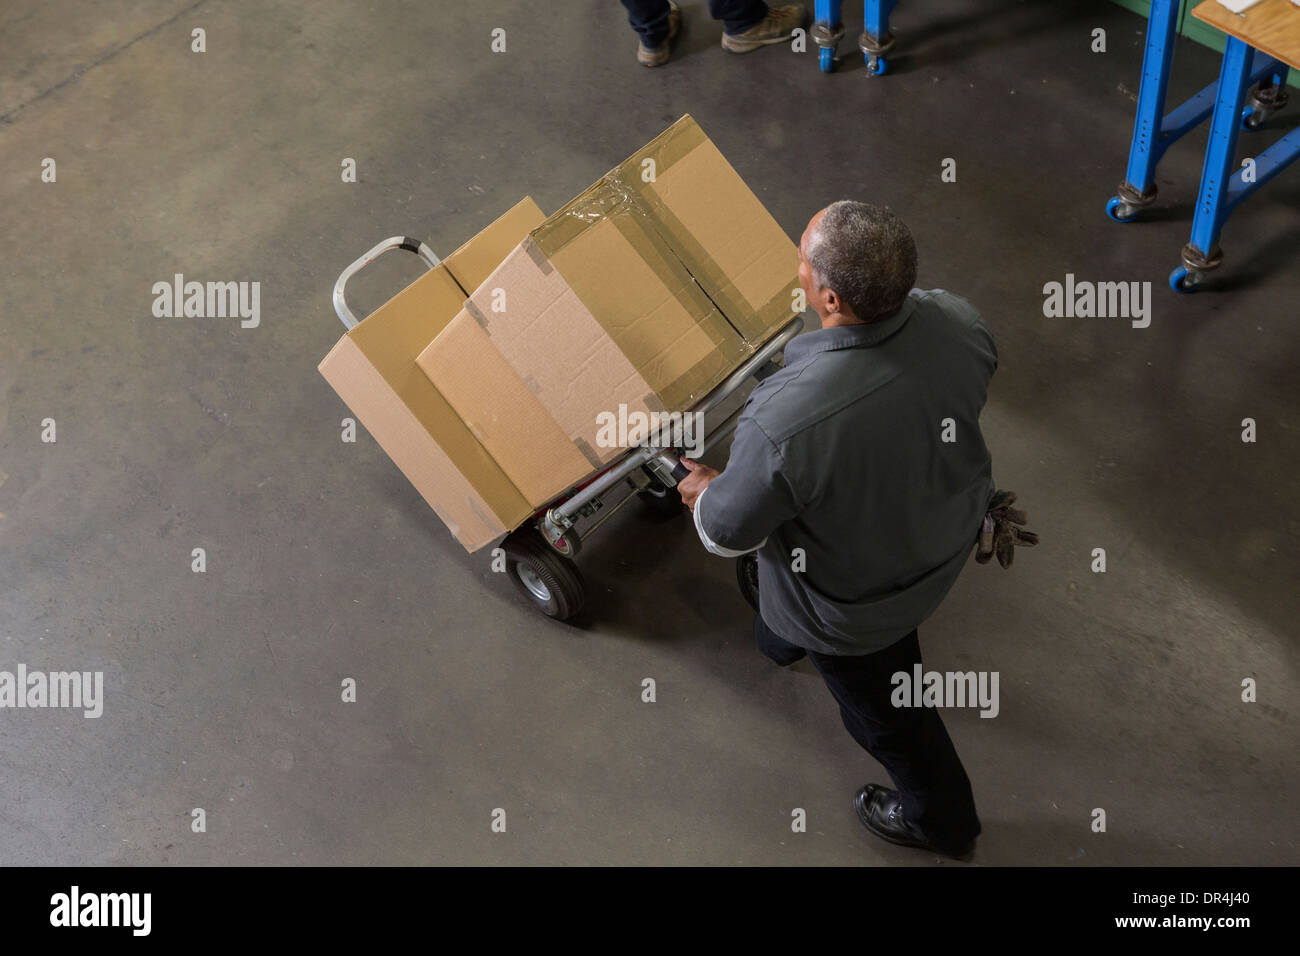 Worker carting boxes on hand truck in warehouse Stock Photo